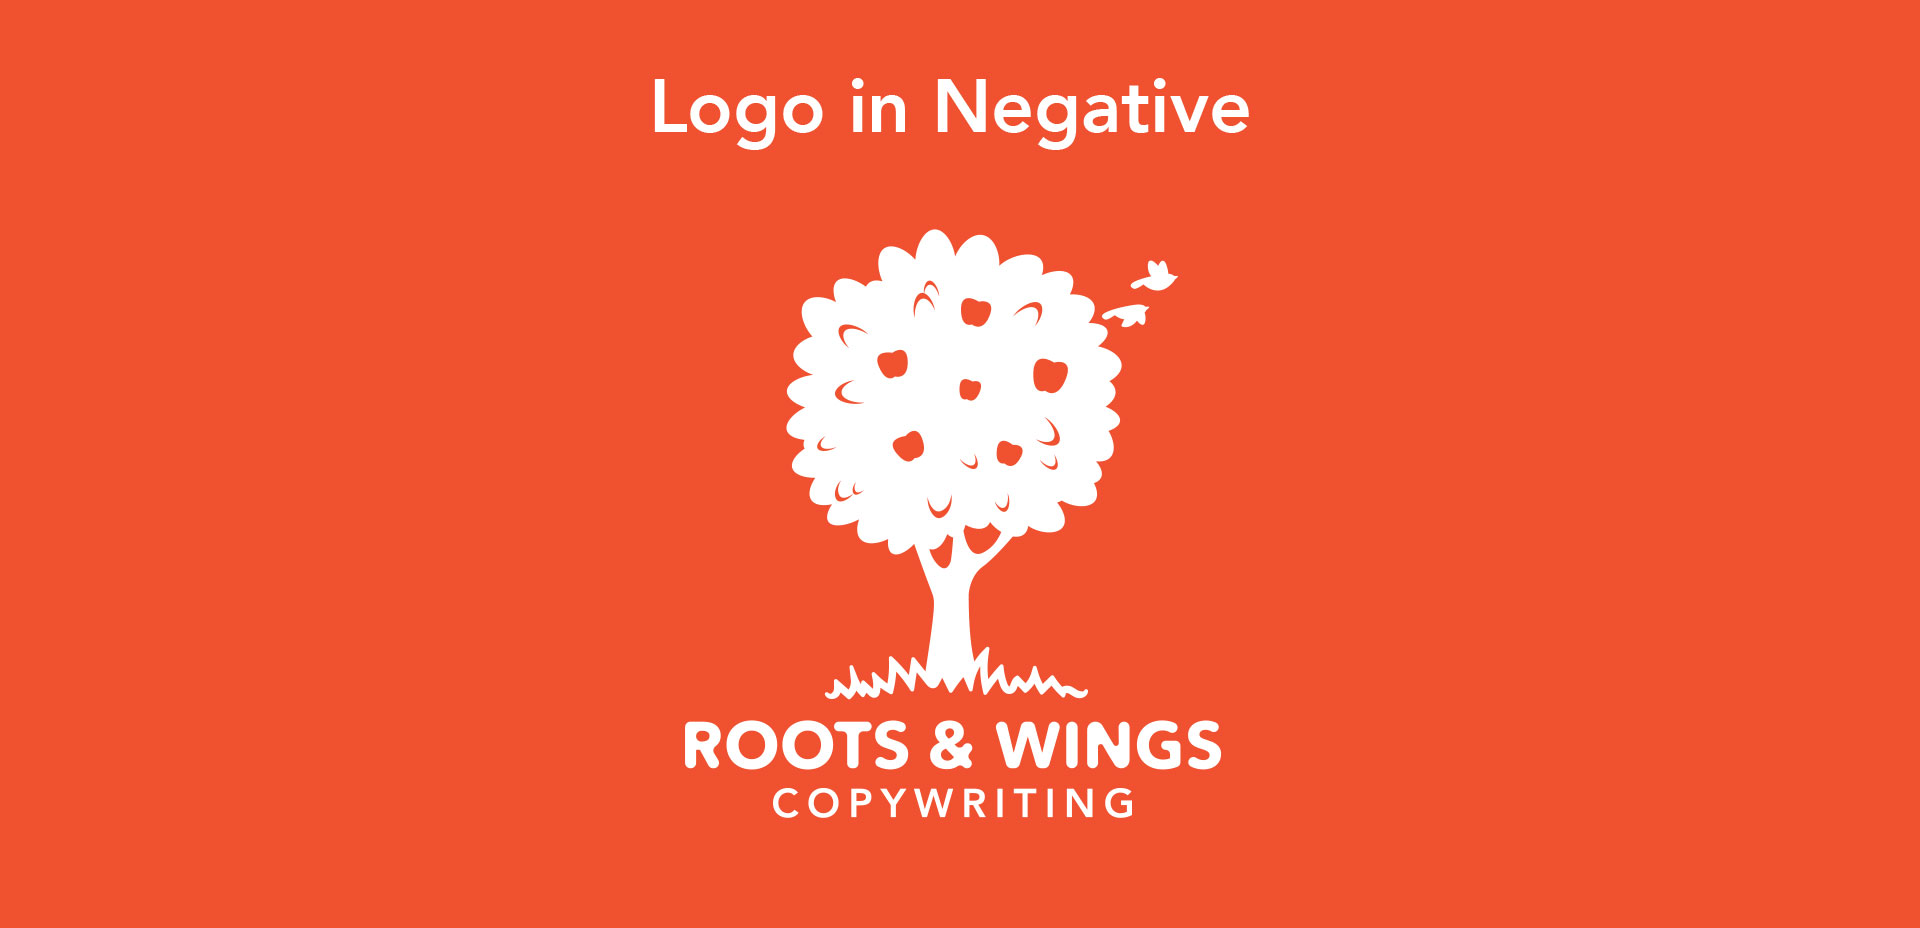 Roots & Wings Logo Negative